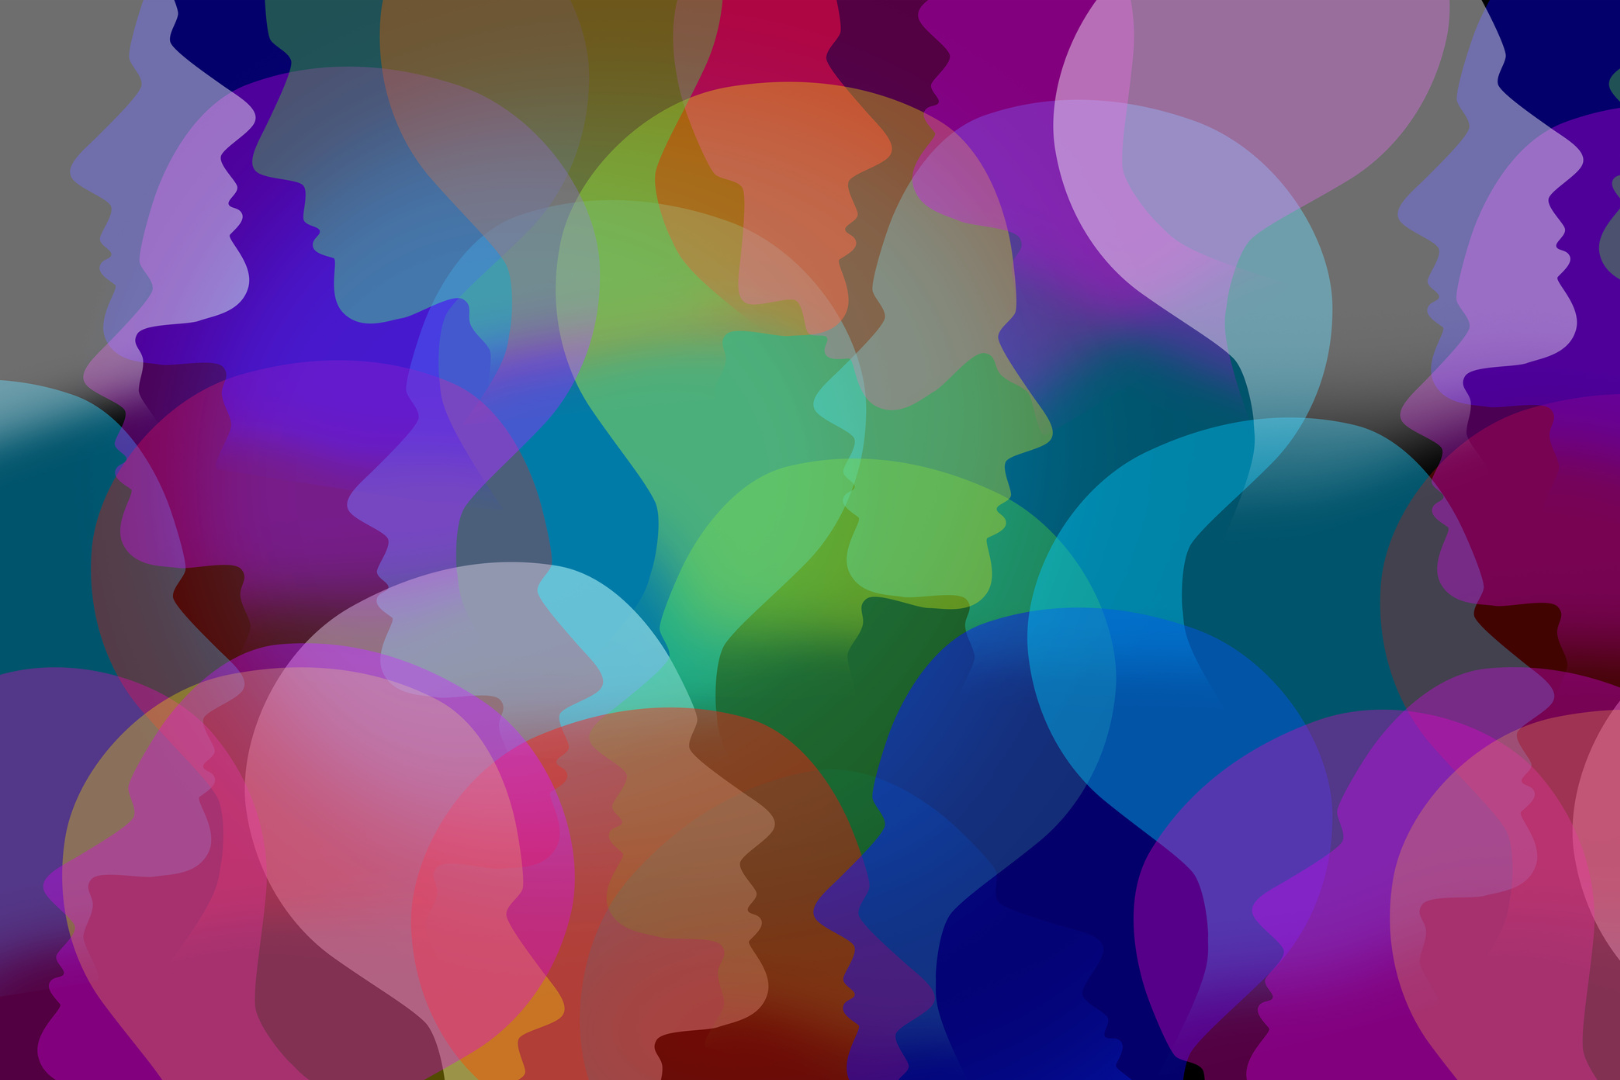 Graphic of colorful faces suggesting collaboration and togetherness